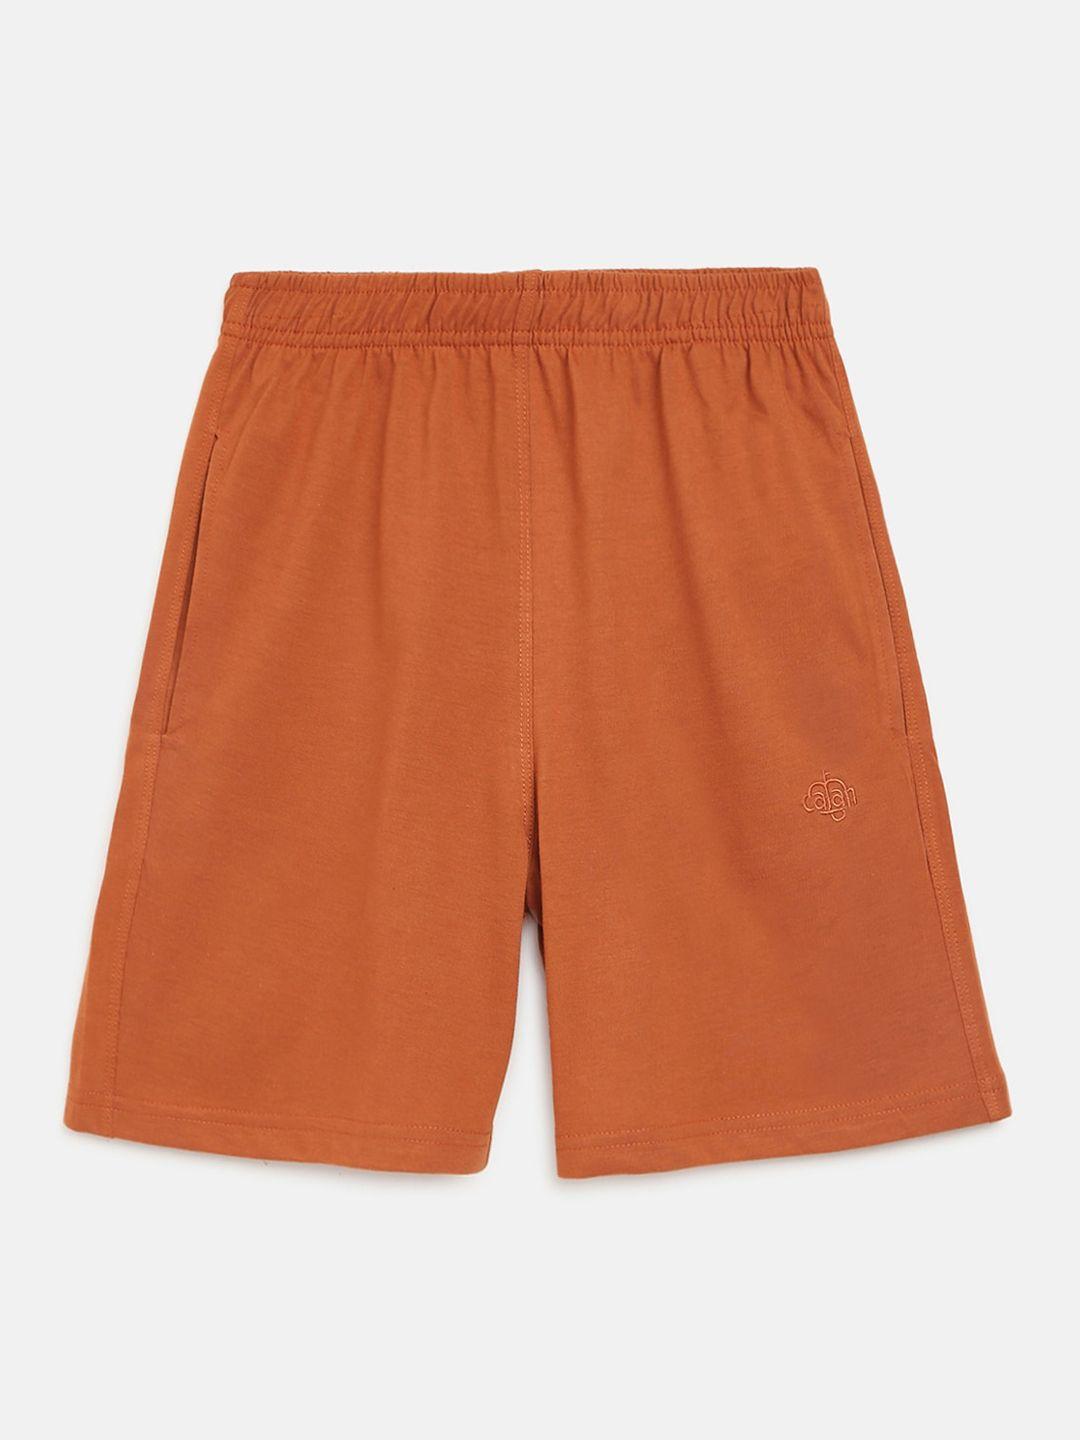 chimprala boys rust regular fit cotton sports shorts with antimicrobial technology